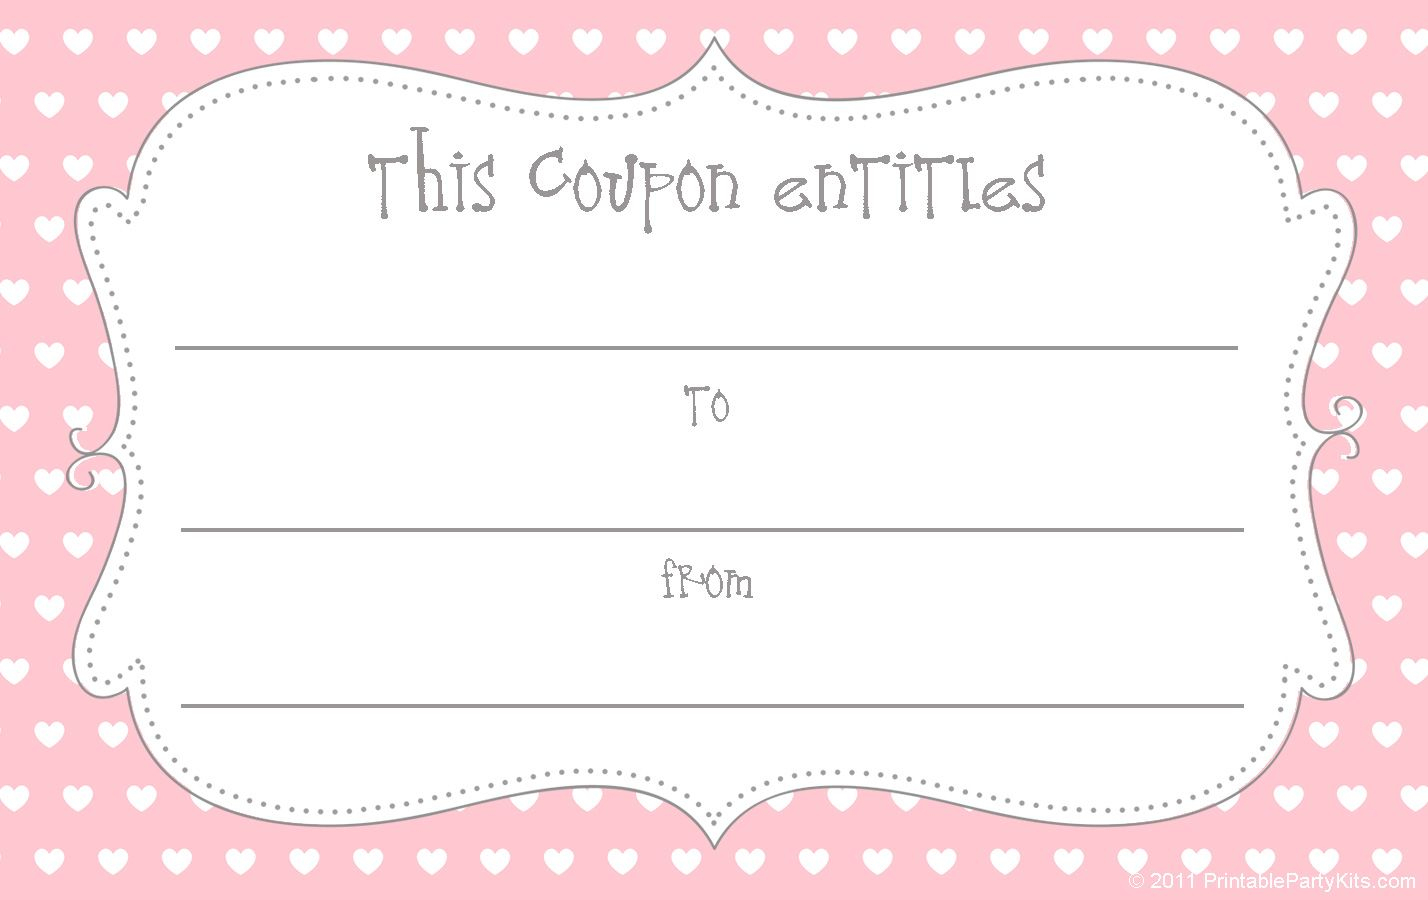 Early Play Templates: Free Gift Coupon Templates To Print Out - Free Printable Coupon Templates